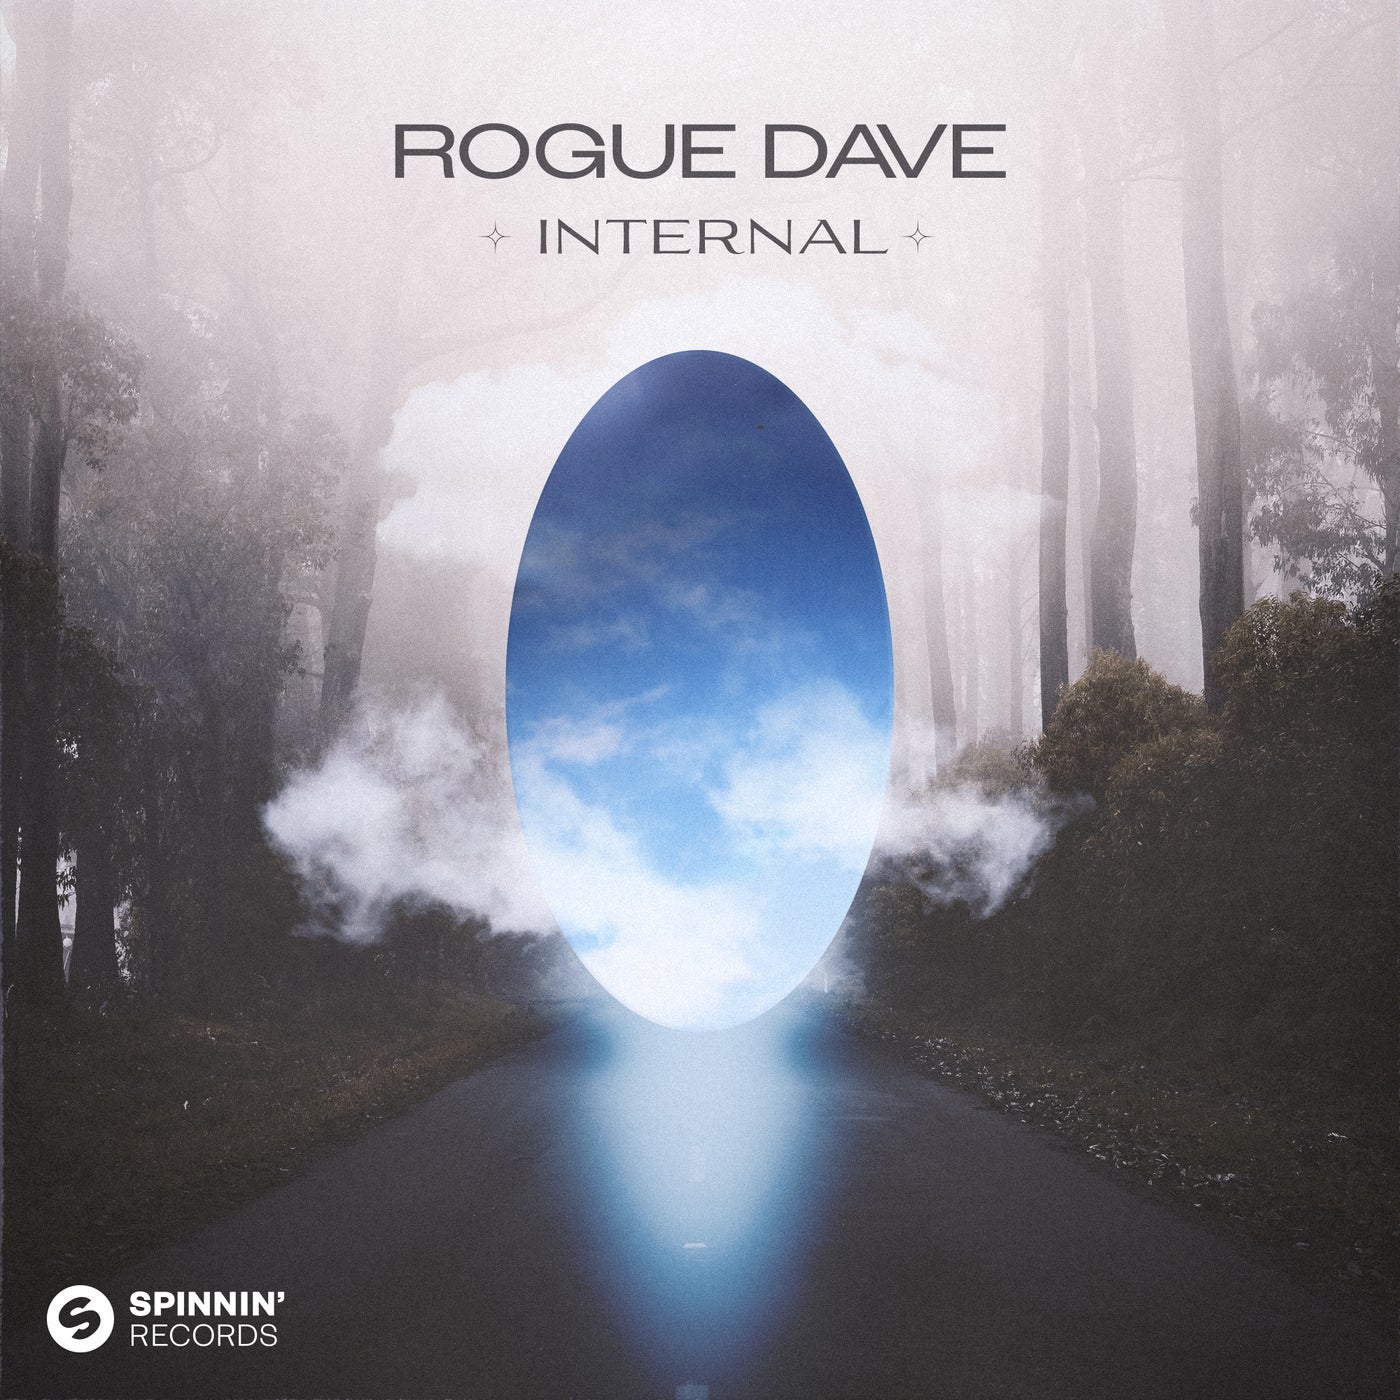 Rogue Dave music download - Beatport